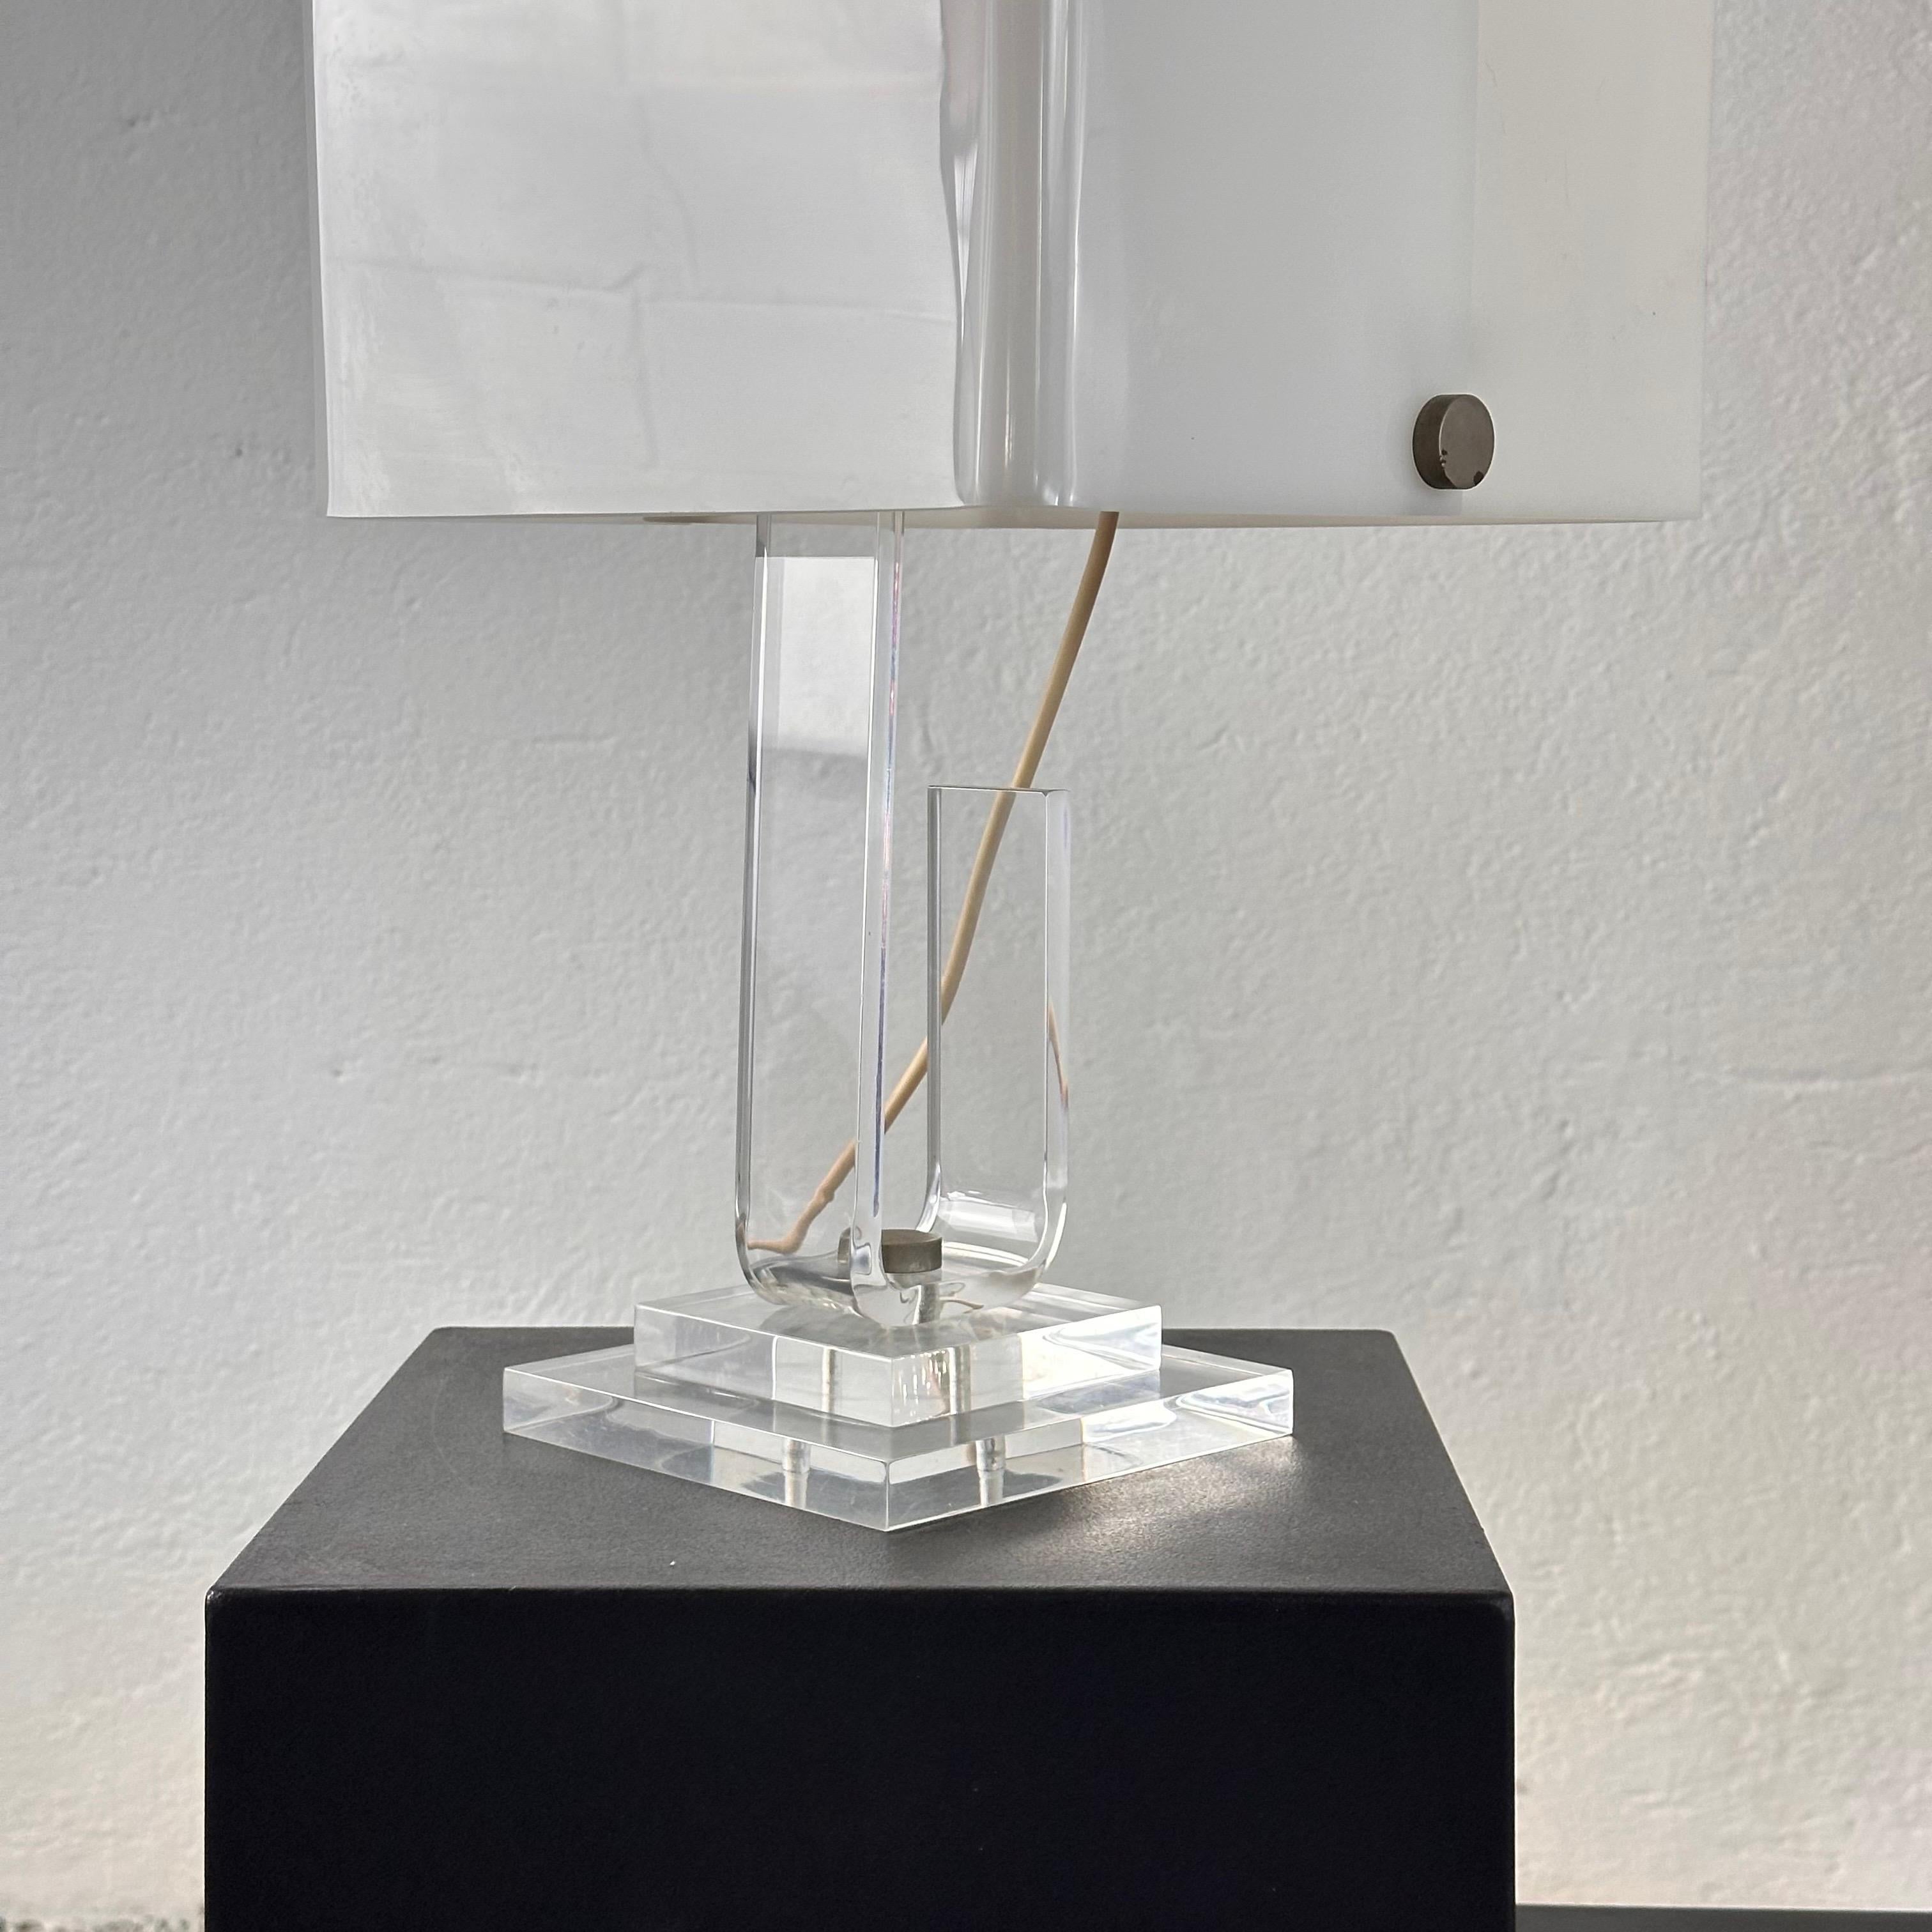 Exquisite Sandro Petti Plexiglass and Brass Table Lamp from Rome, 1970s For Sale 11